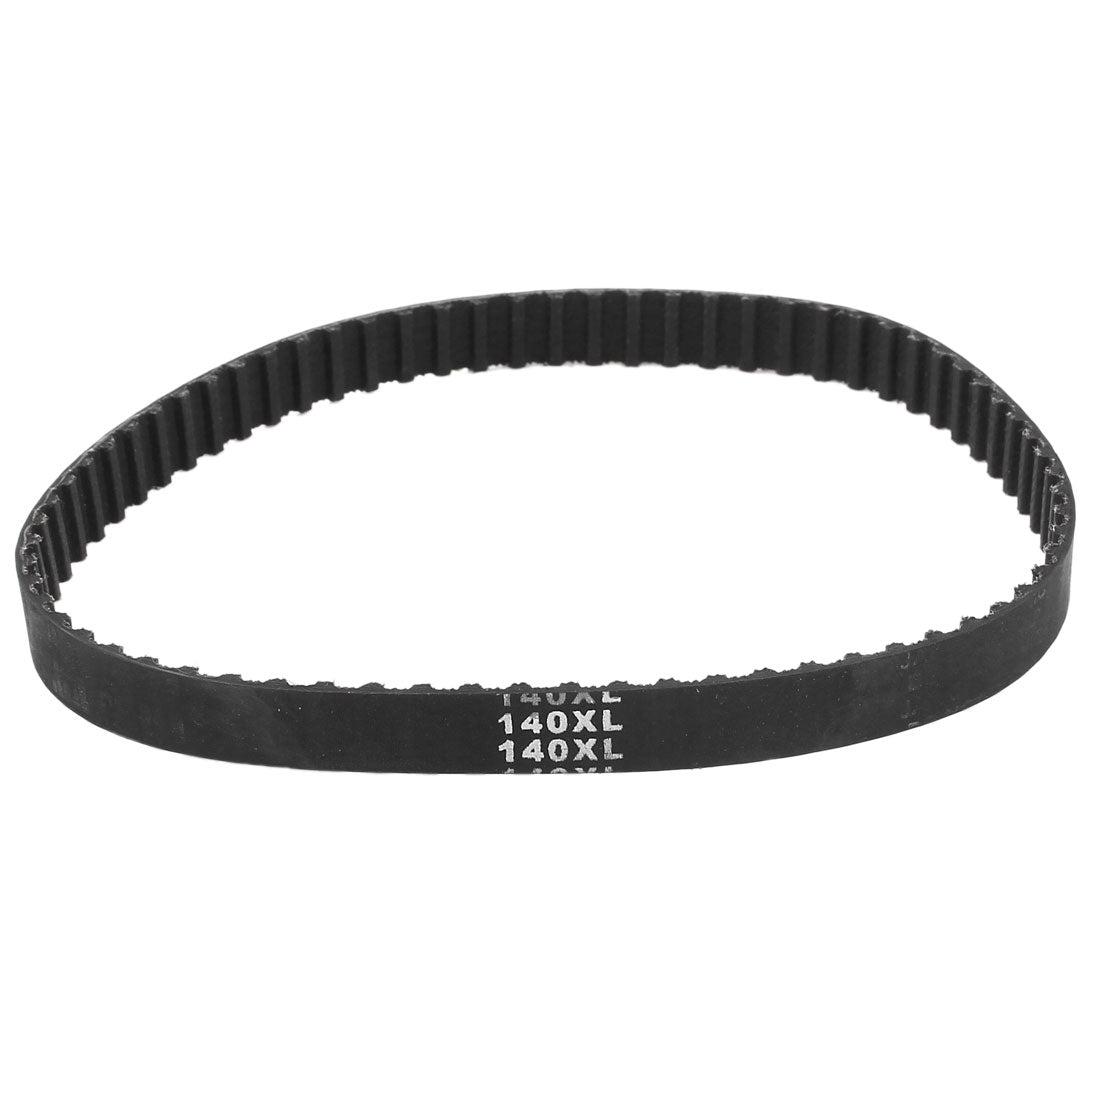 uxcell Uxcell 140XL 14" Girth 5.08mm Pitch 70-Teeth Black Rubber Industrial Synchro Machine Synchronous Timing Belt